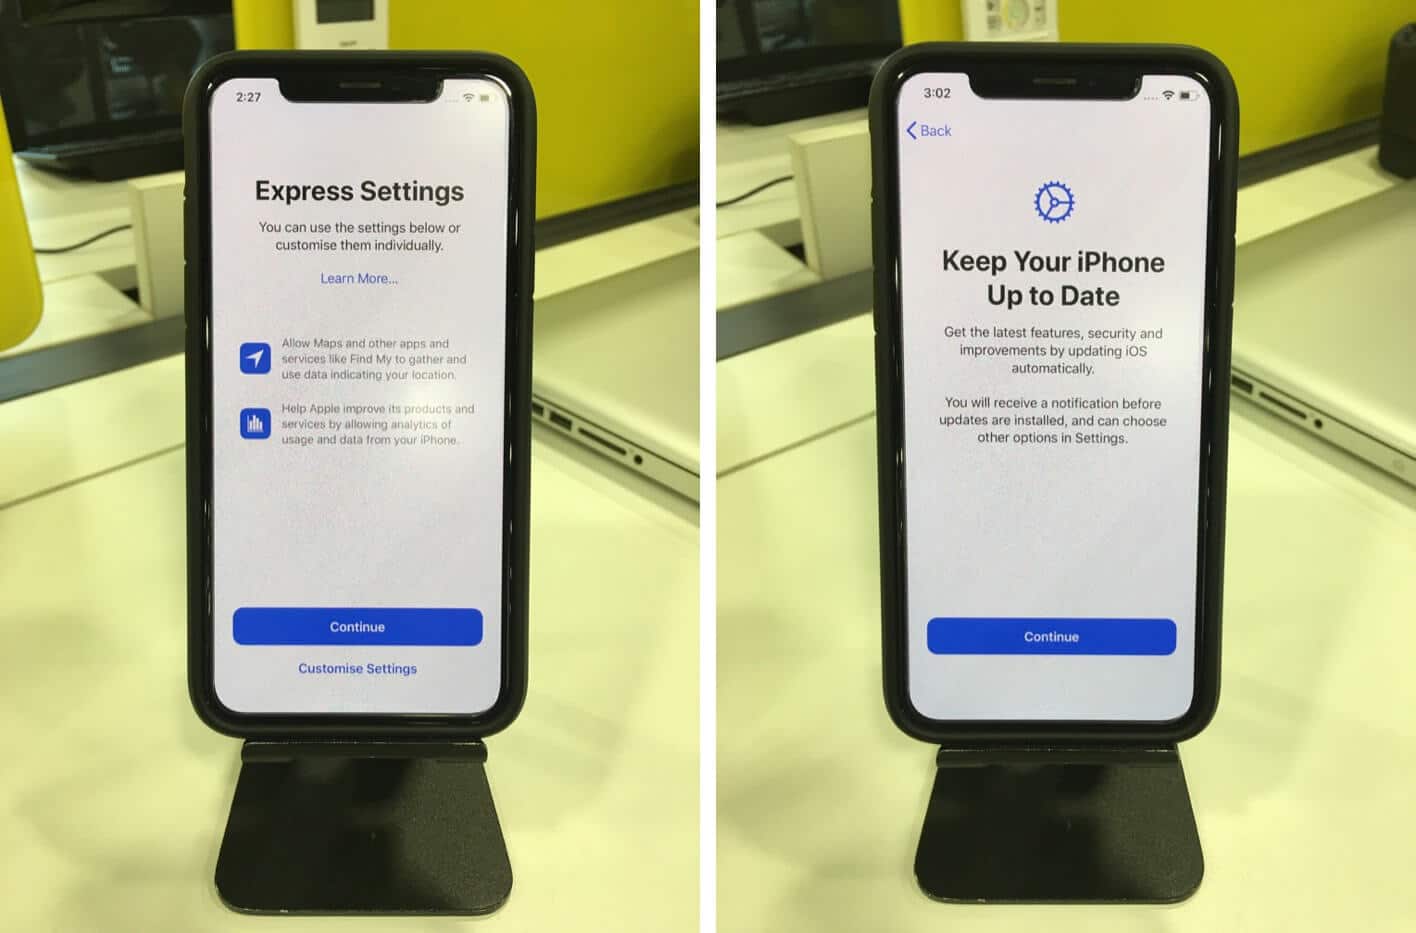 tap on continue for express settings and then tap on continue for keep your iphone up to date